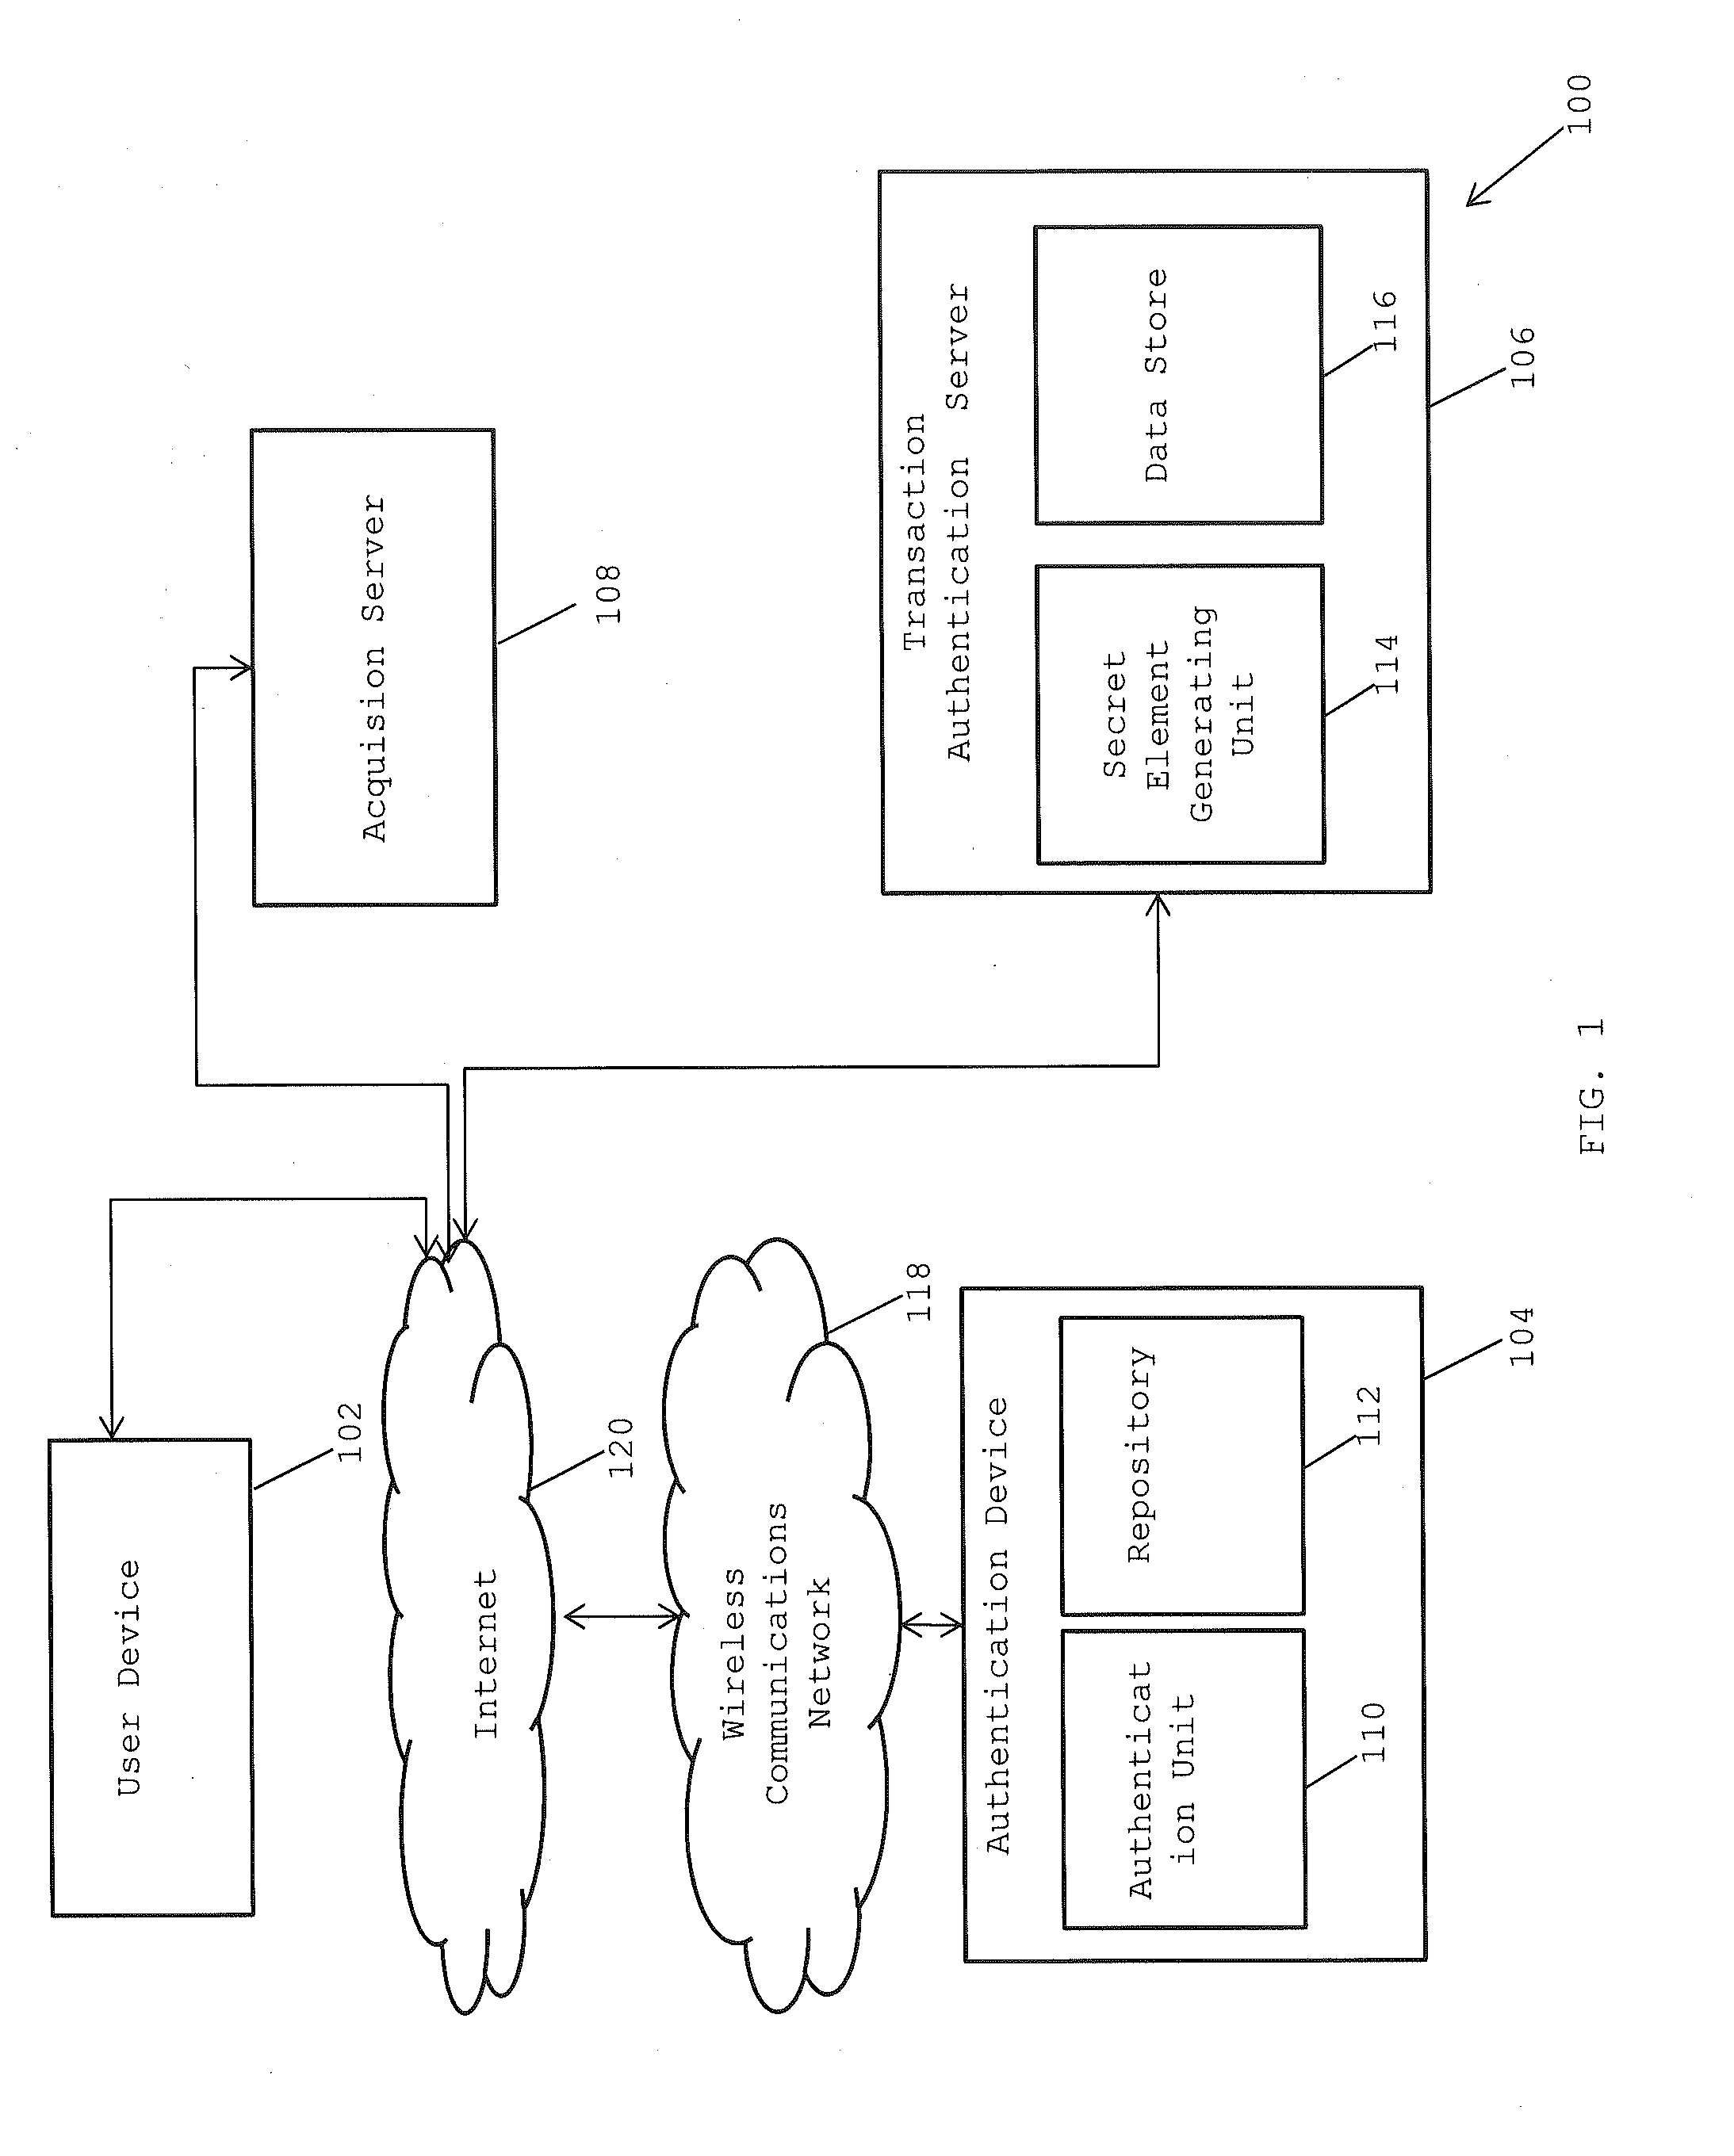 Method and system for providing secure end-to-end authentication and authorization of electronic transactions